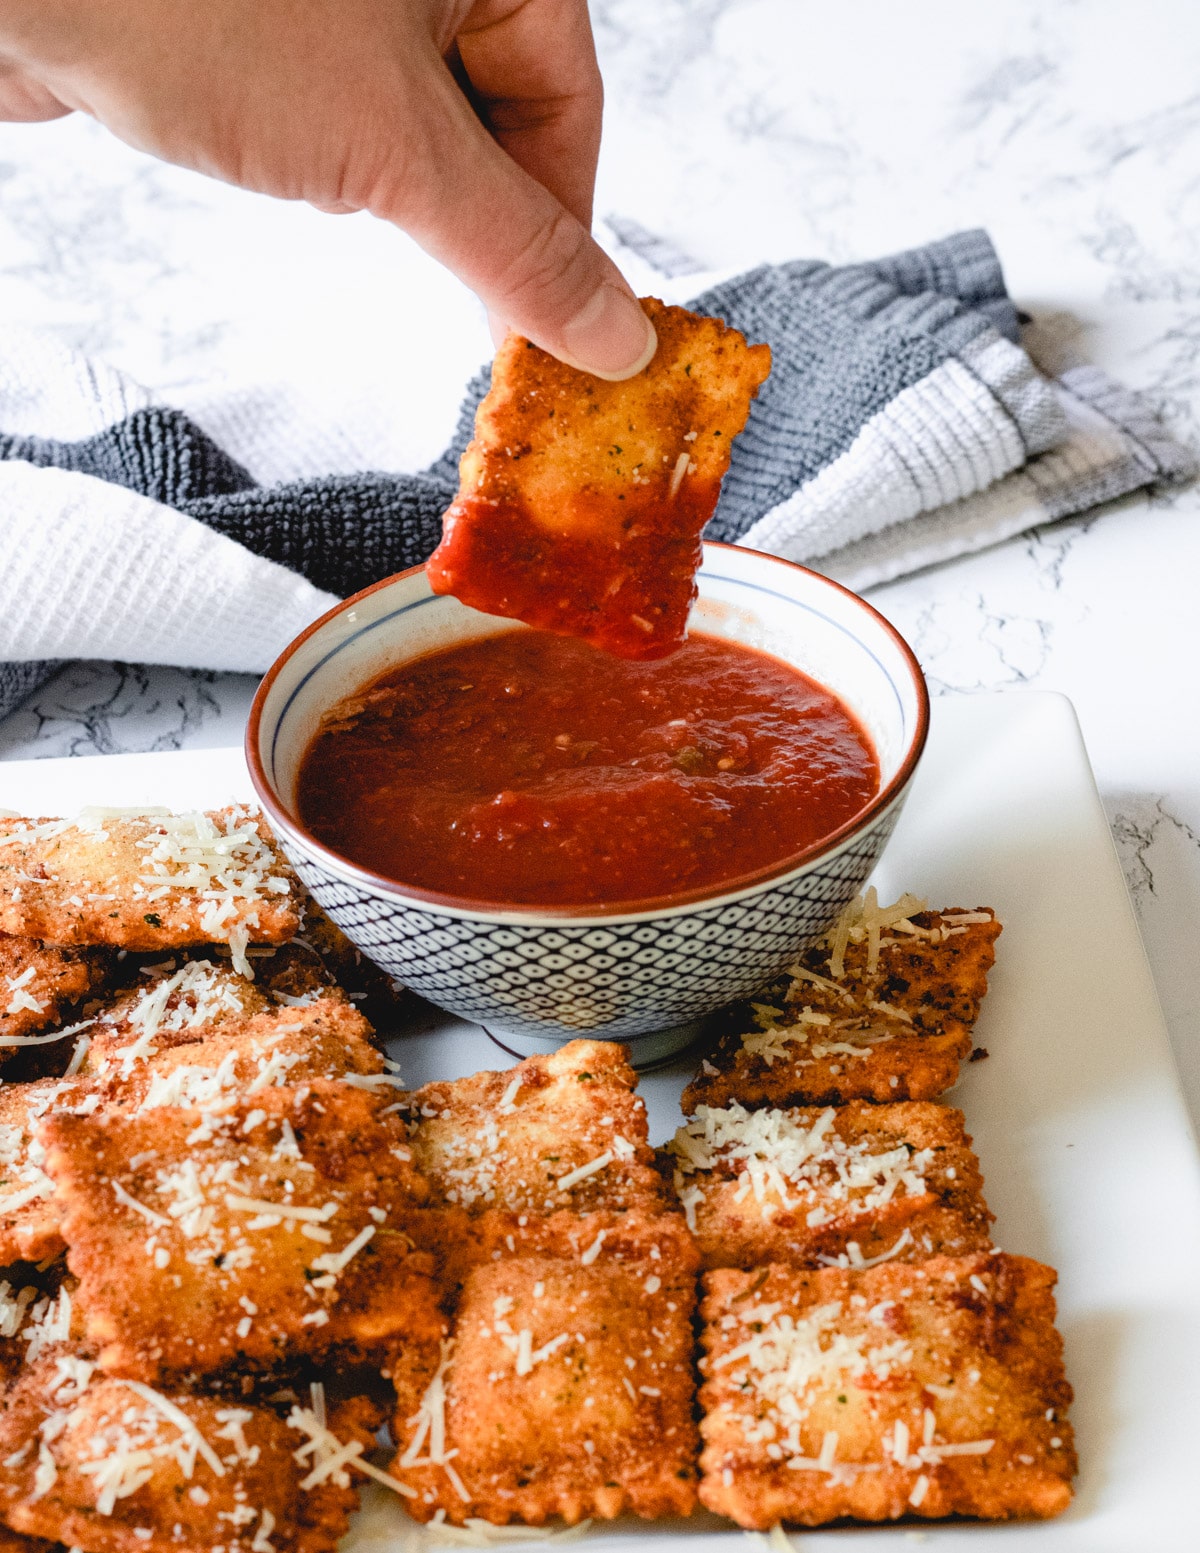 A hand dipping toasted ravioli into a bowl of marinara sauce, with a platter of toasted ravioli.